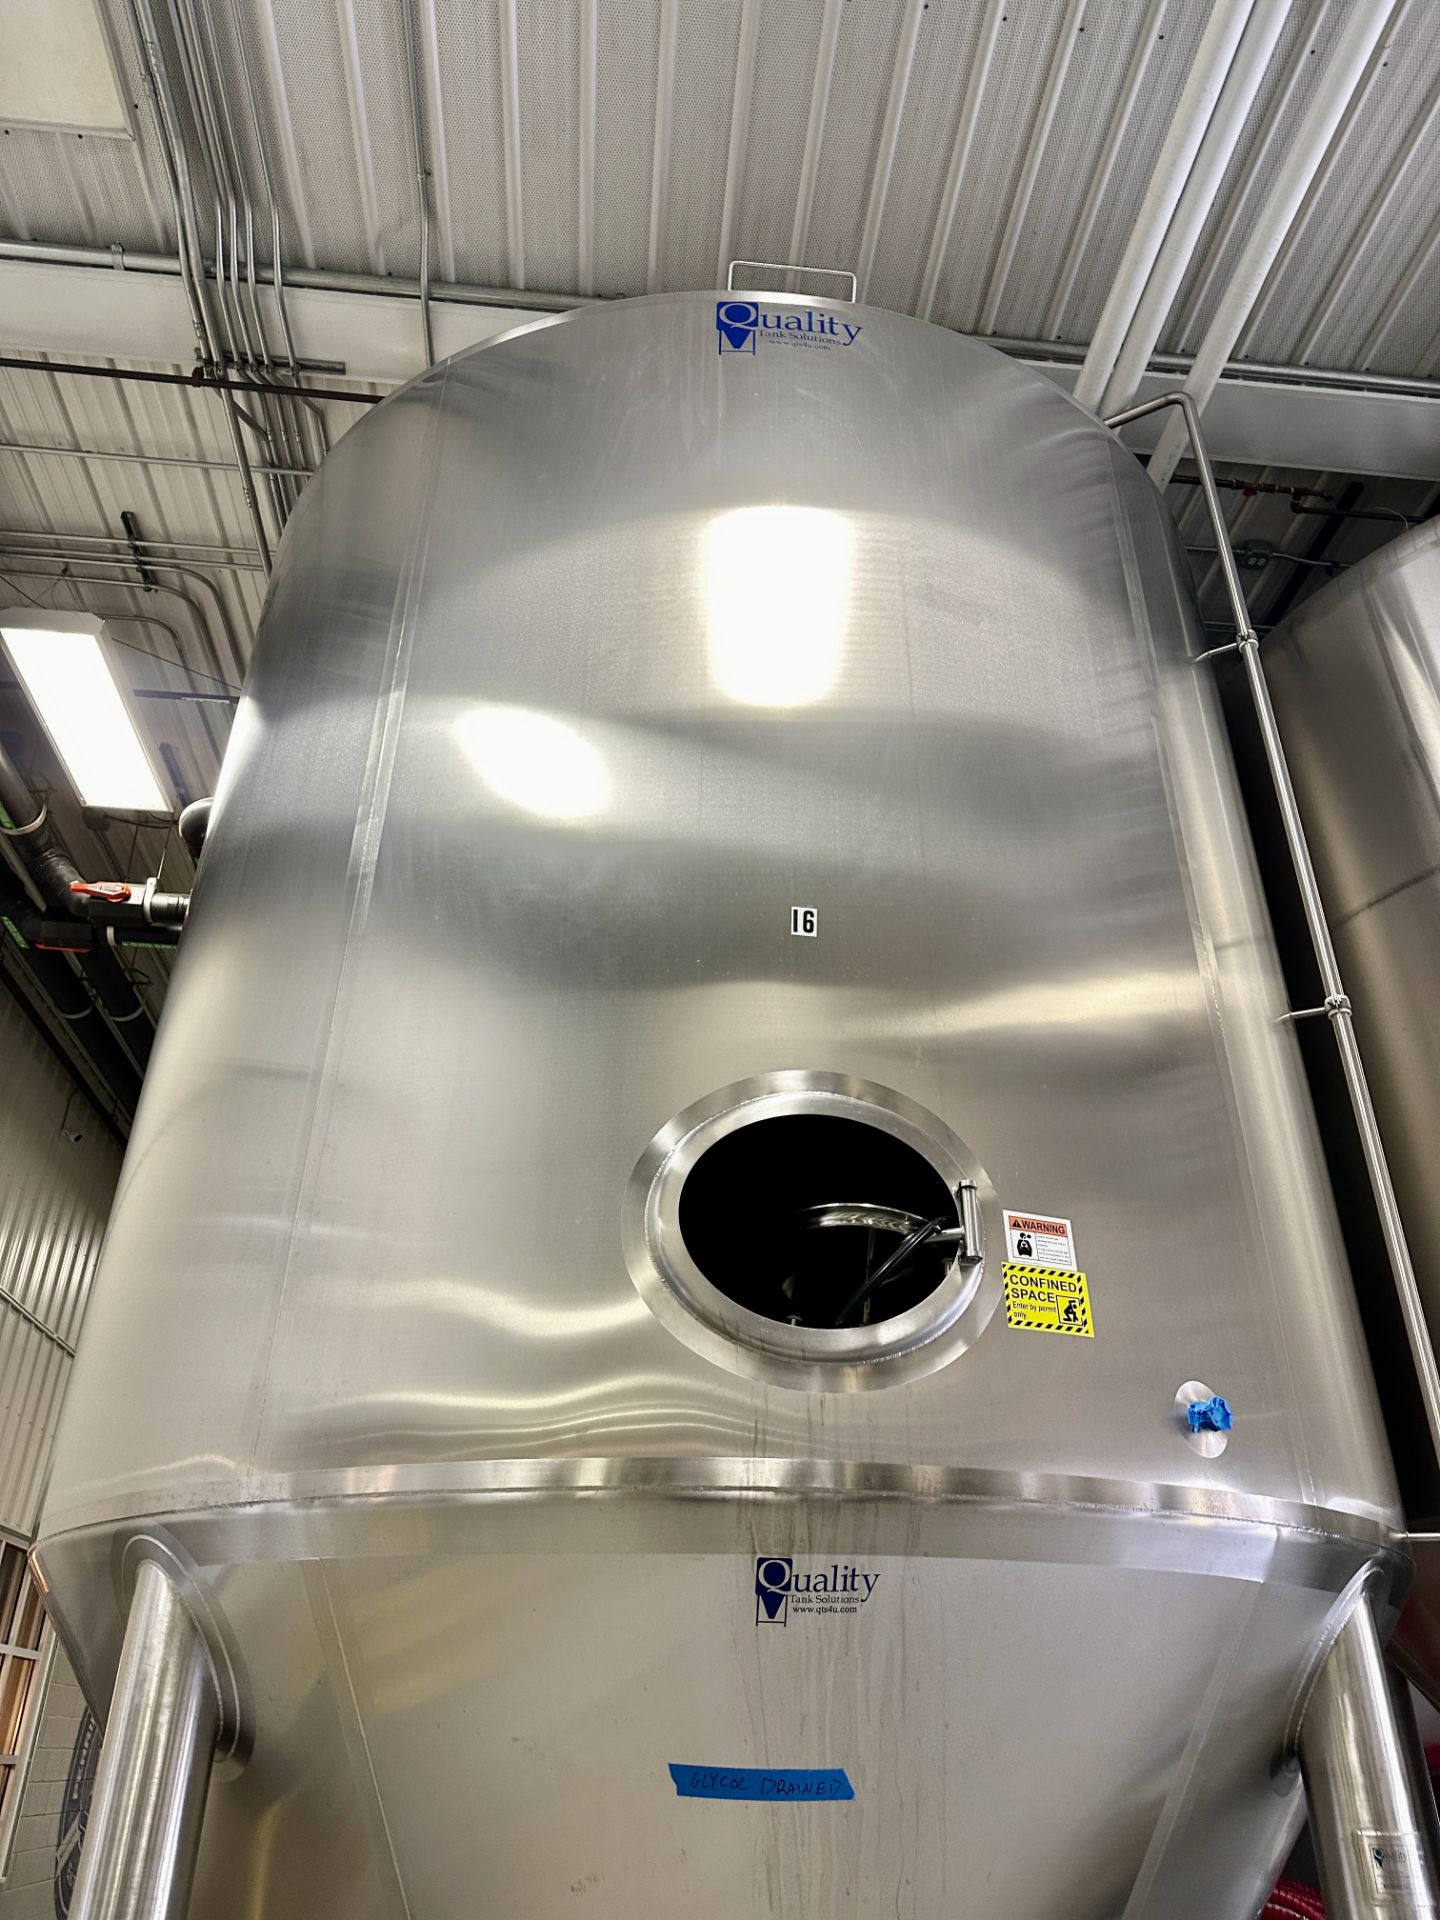 2020 Quality Tank (QTS) 150 BBL FV or 5,500 Gal Max Capacity Jacketed Fermentation | Rig Fee $2300 - Image 3 of 8